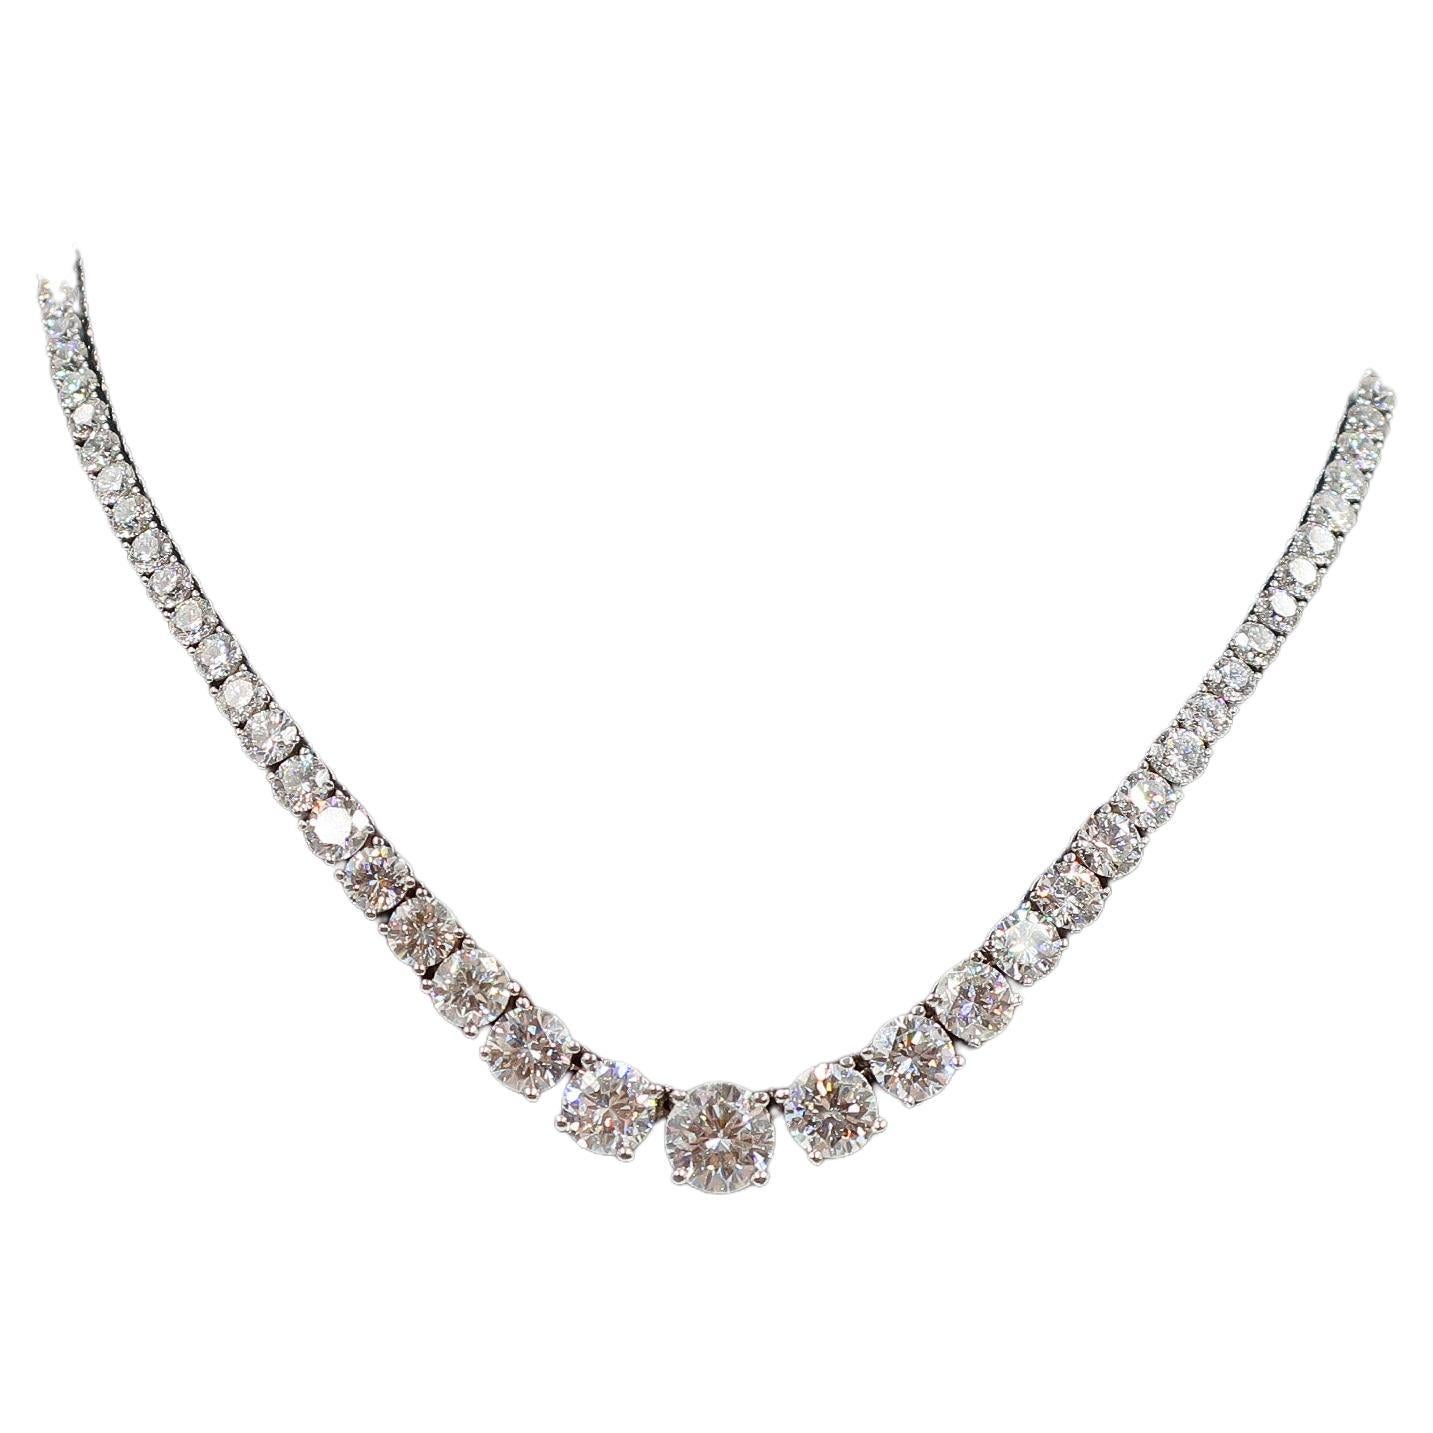 This beautiful graduated in size riviera style diamond necklace features a total of 104 round brilliant cut diamonds weighing a total of 27.46 carats, set in 18K white gold. Diamond Color ranges from D-F, SI clarity

Style available in different